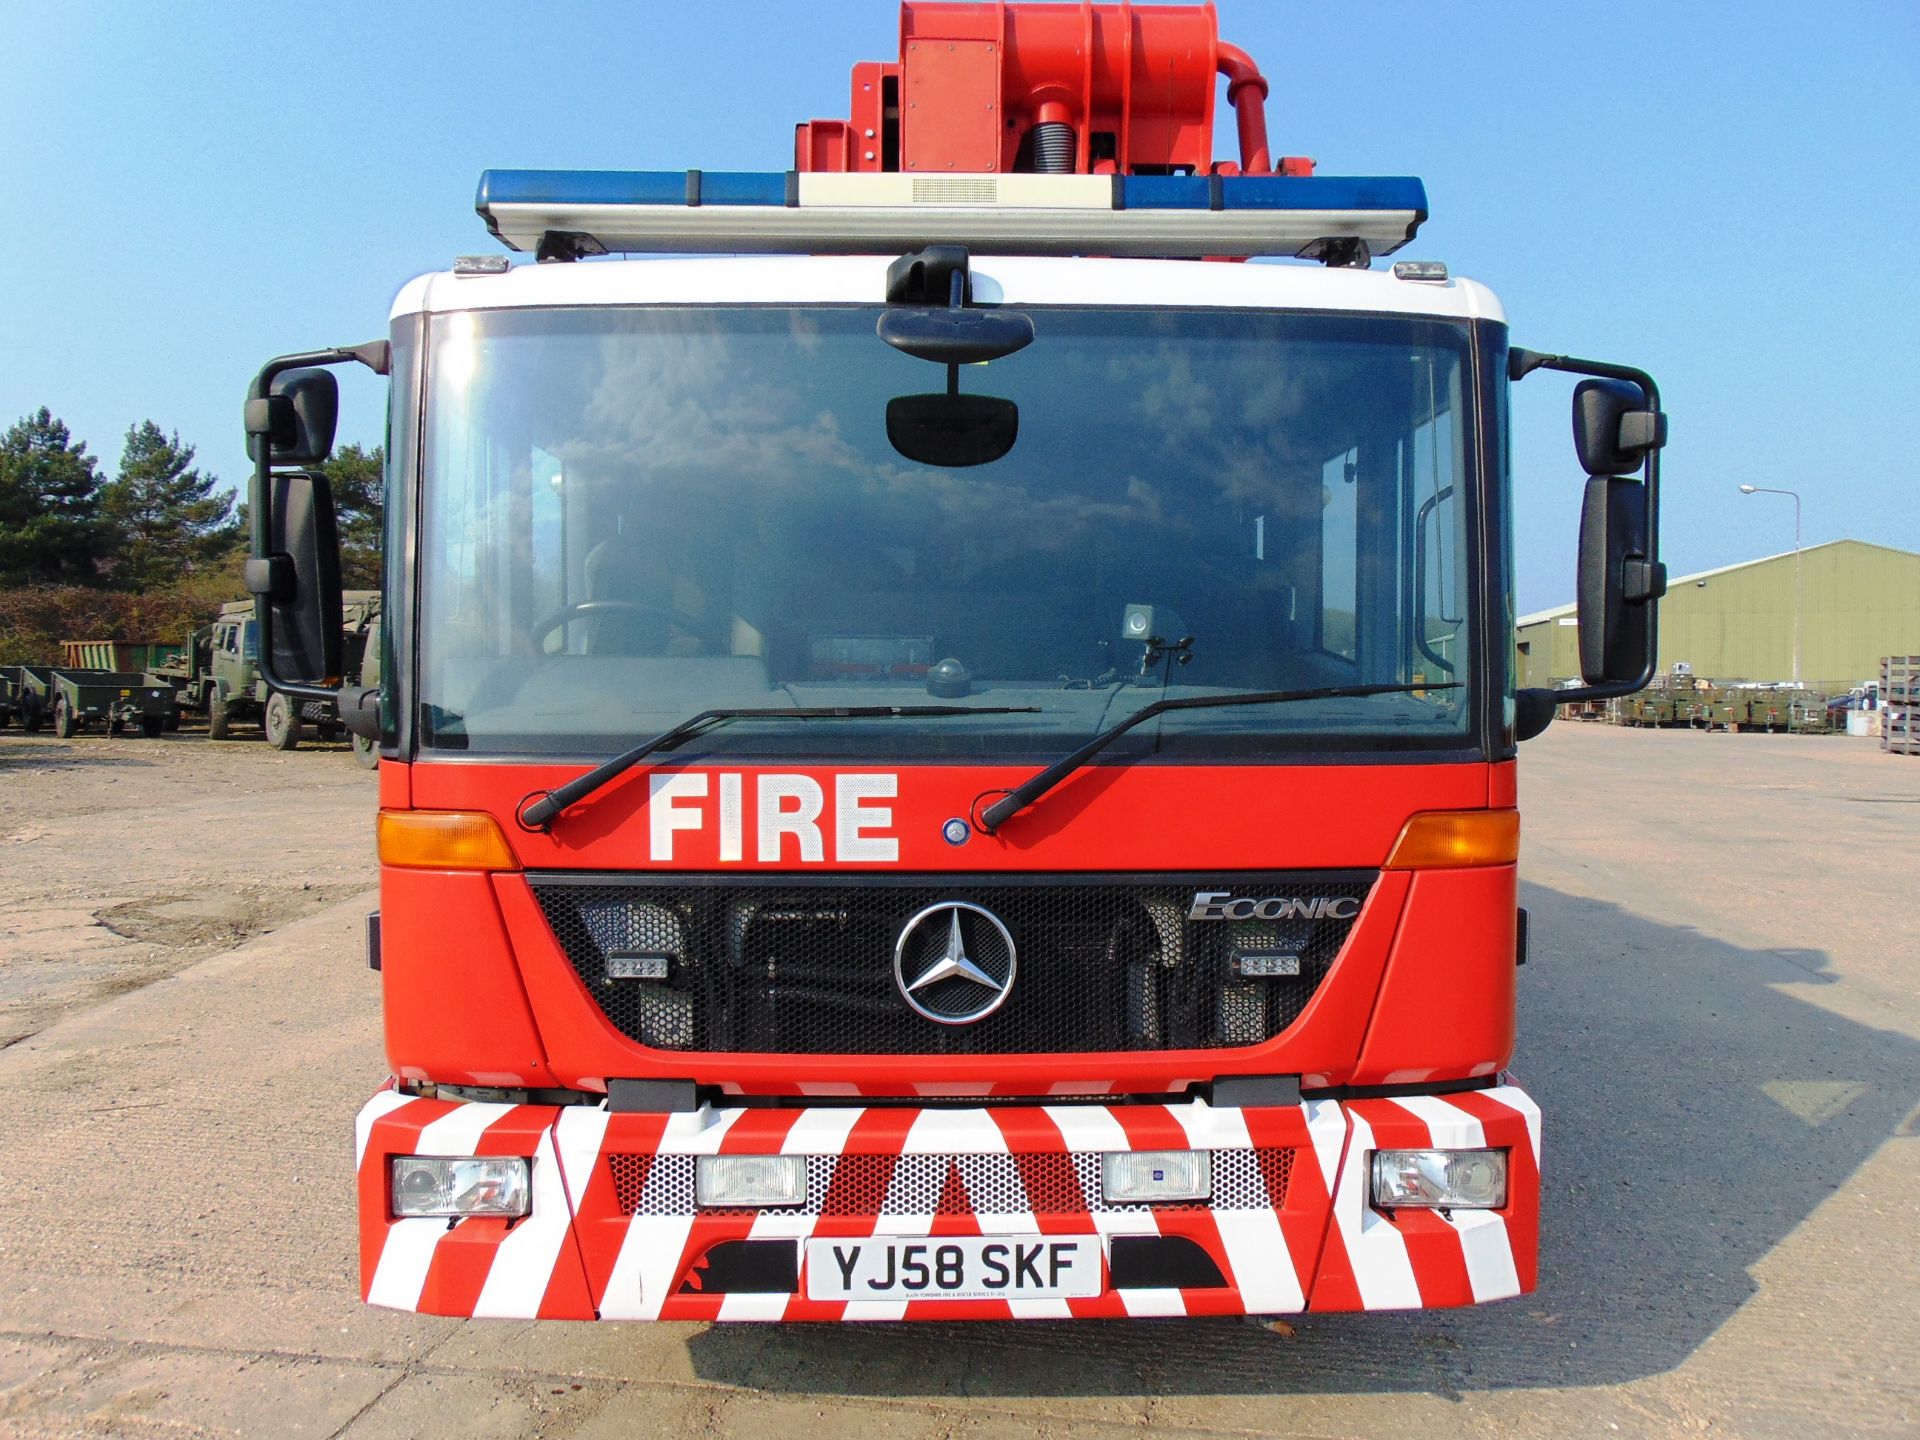 2008 Mercedes Econic CARP (Combined Aerial Rescue Pump) 6x2 Aerial Work Platform / Fire Appliance - Image 42 of 49